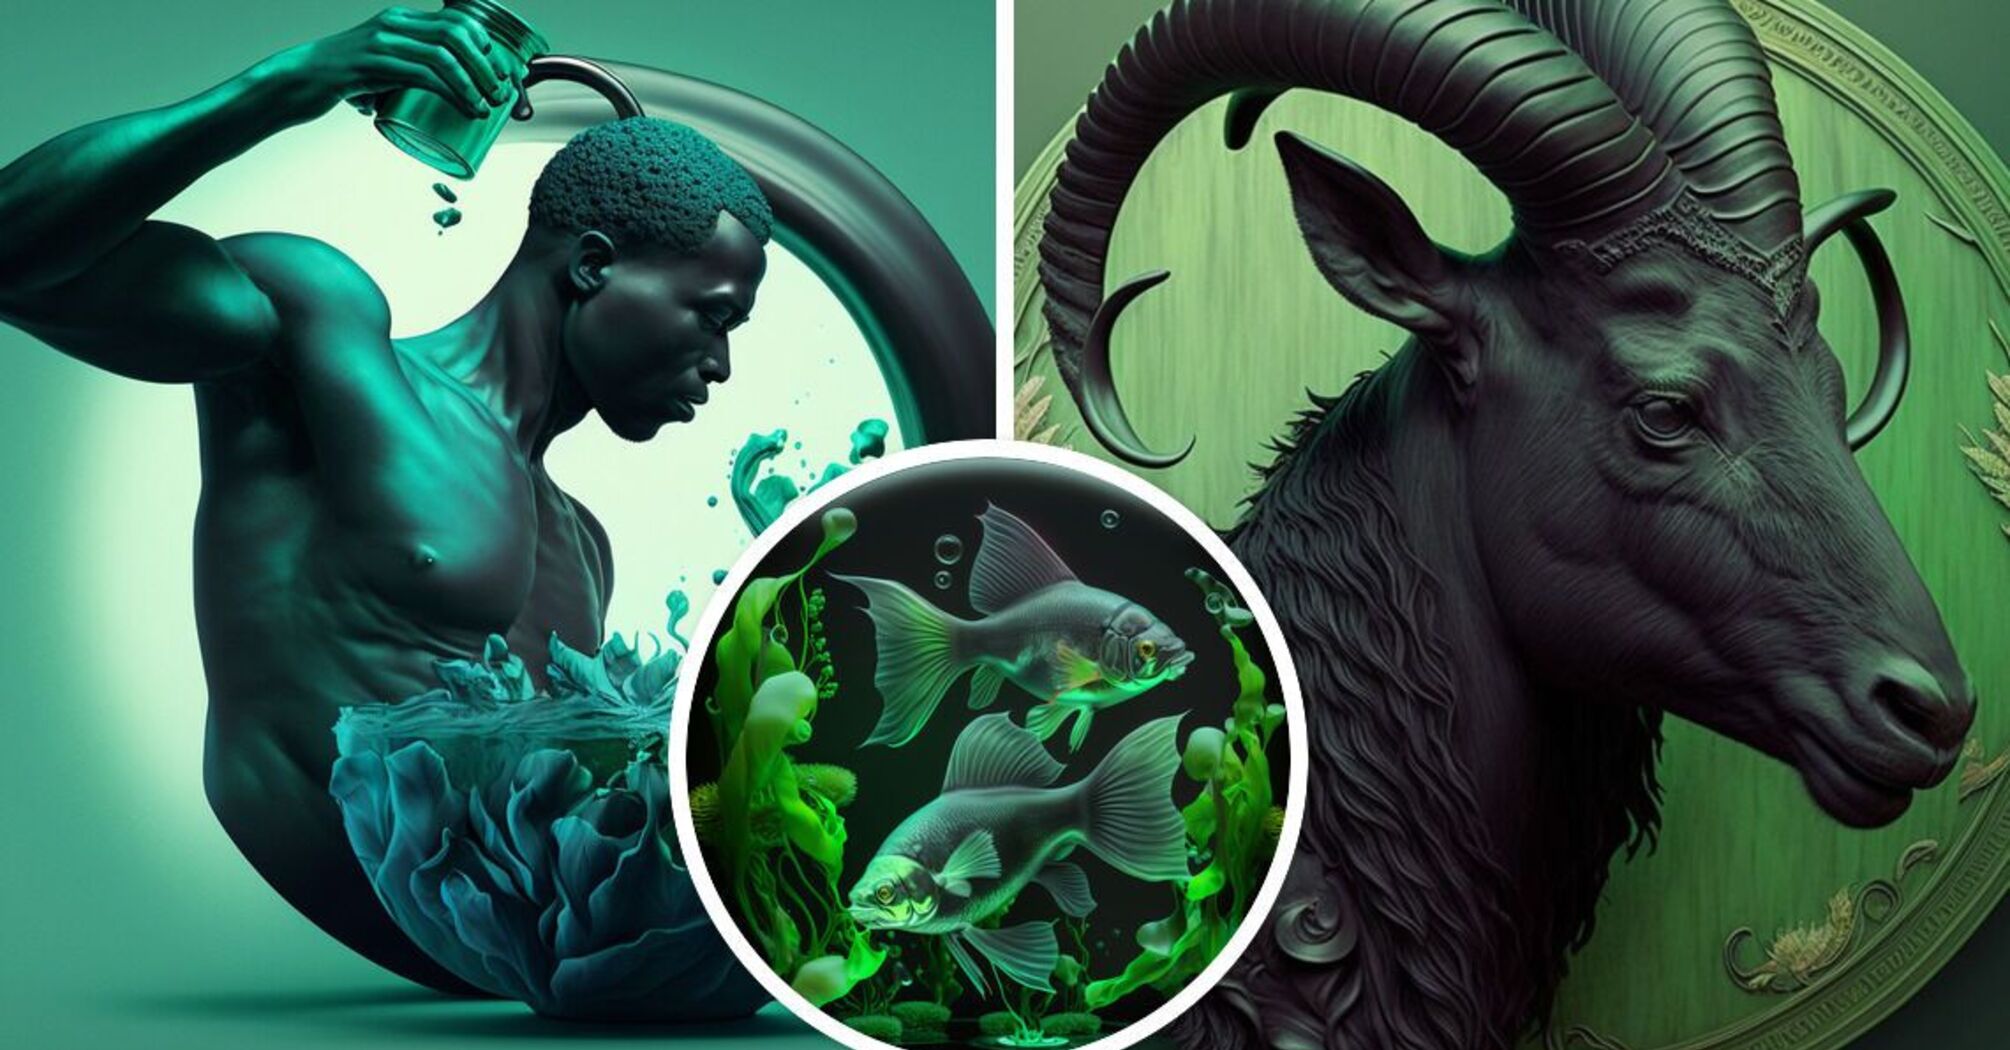 These zodiac signs will have opportunities to be the luckiest: horoscope for May